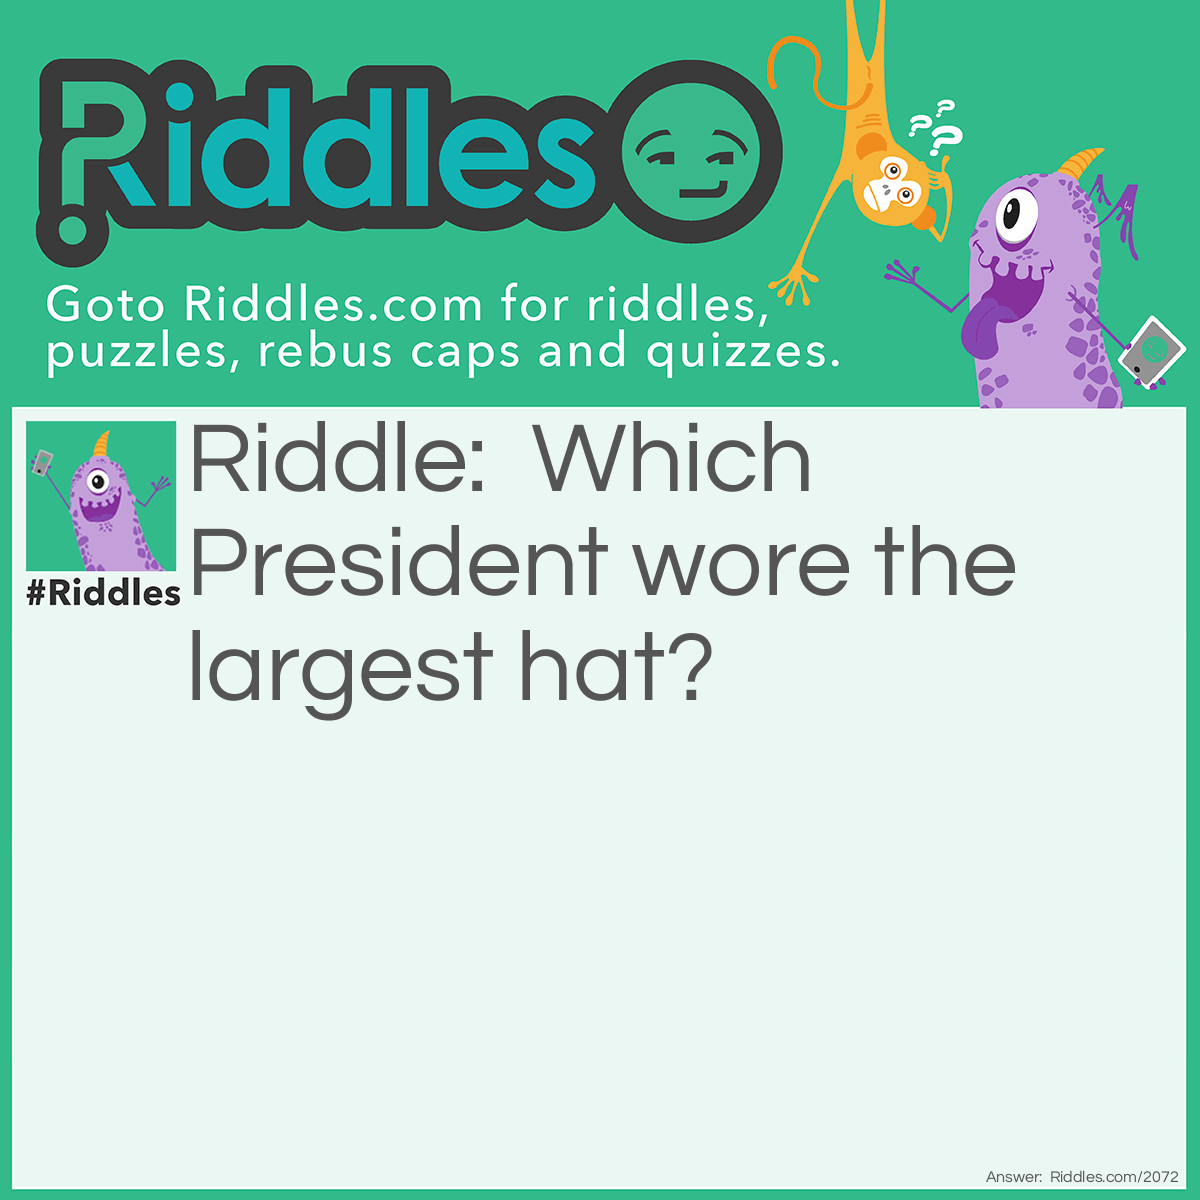 Riddle: Which President wore the largest hat? Answer: The one with the largest head.